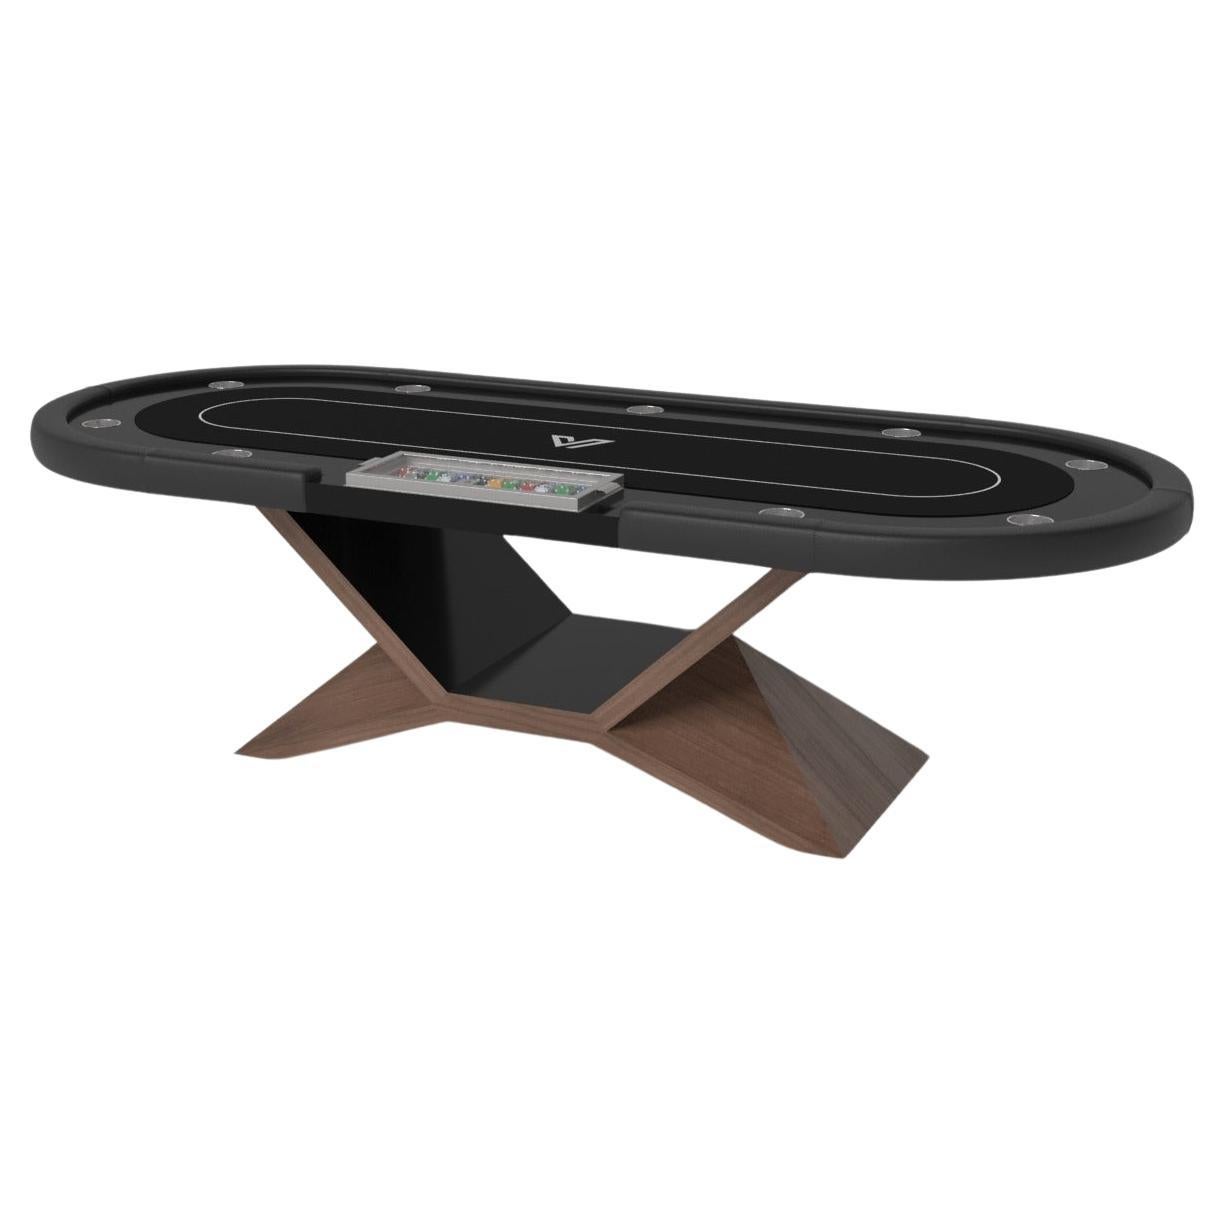 Elevate Customs Kors Poker Tables / Solid Walnut Wood in 8'8" - Made in USA